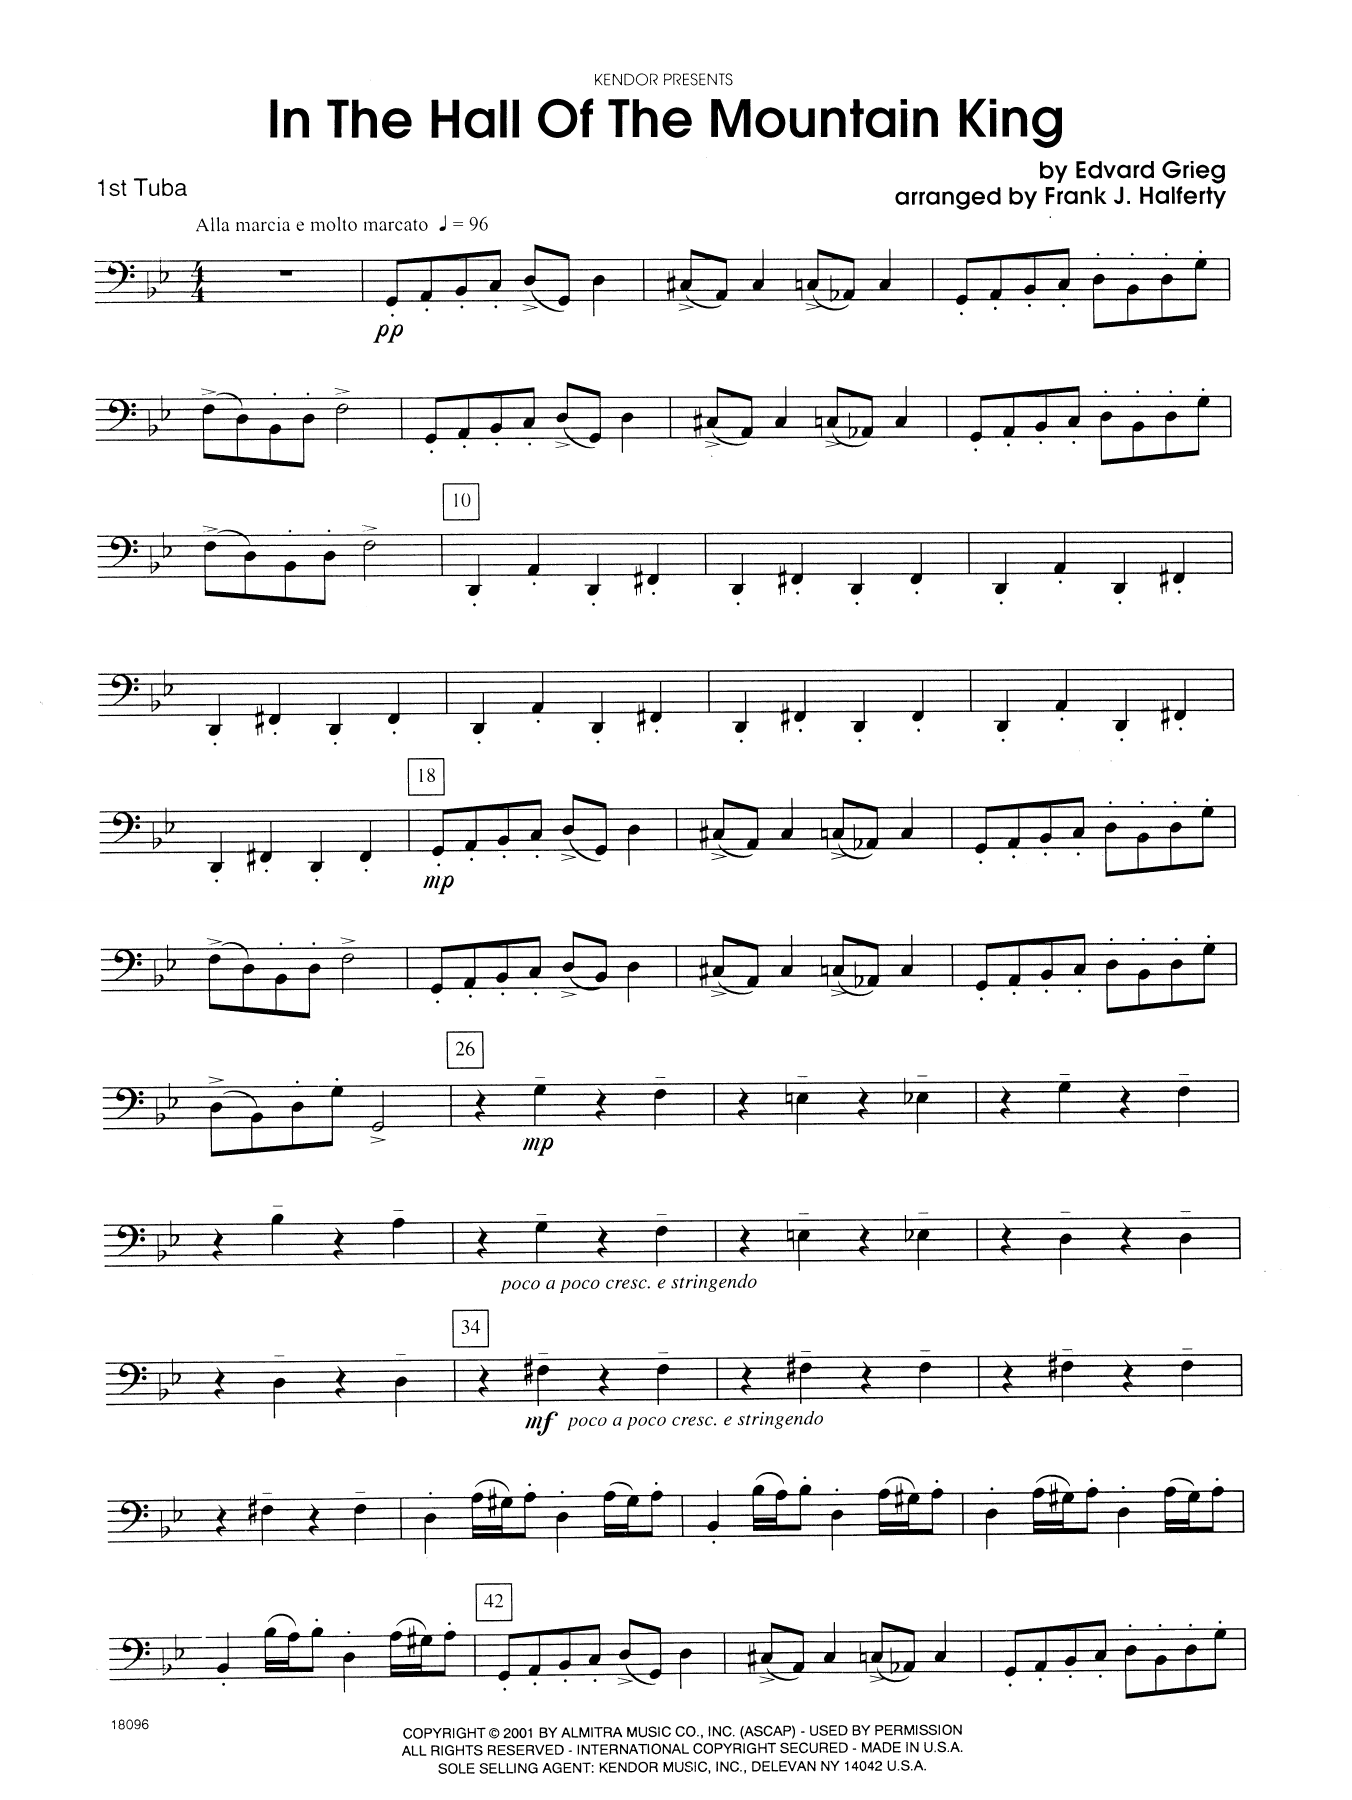 Download Halferty In the Hall of the Mountain King - Tuba Sheet Music